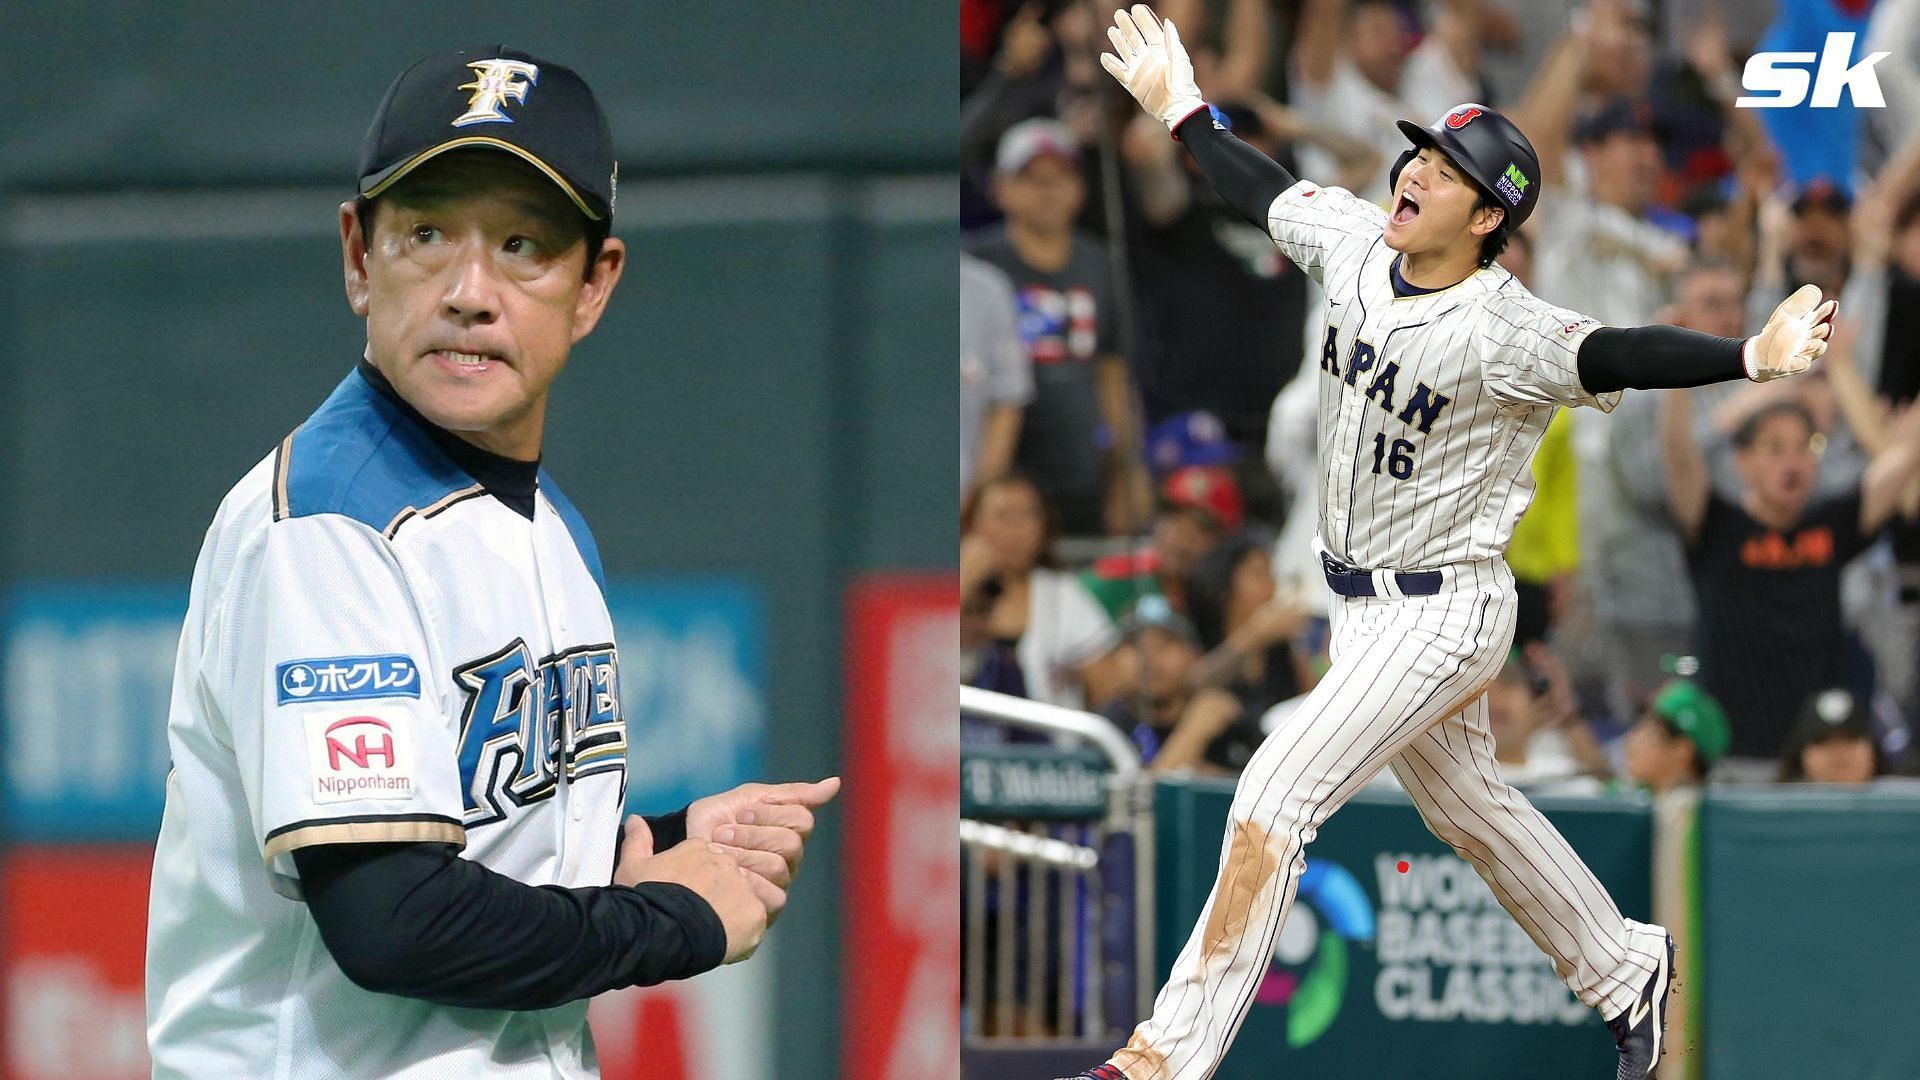 Hideki Kuriyama was Shohei Ohtani manager from 2013 until 2017, when the two-way star left for MLB